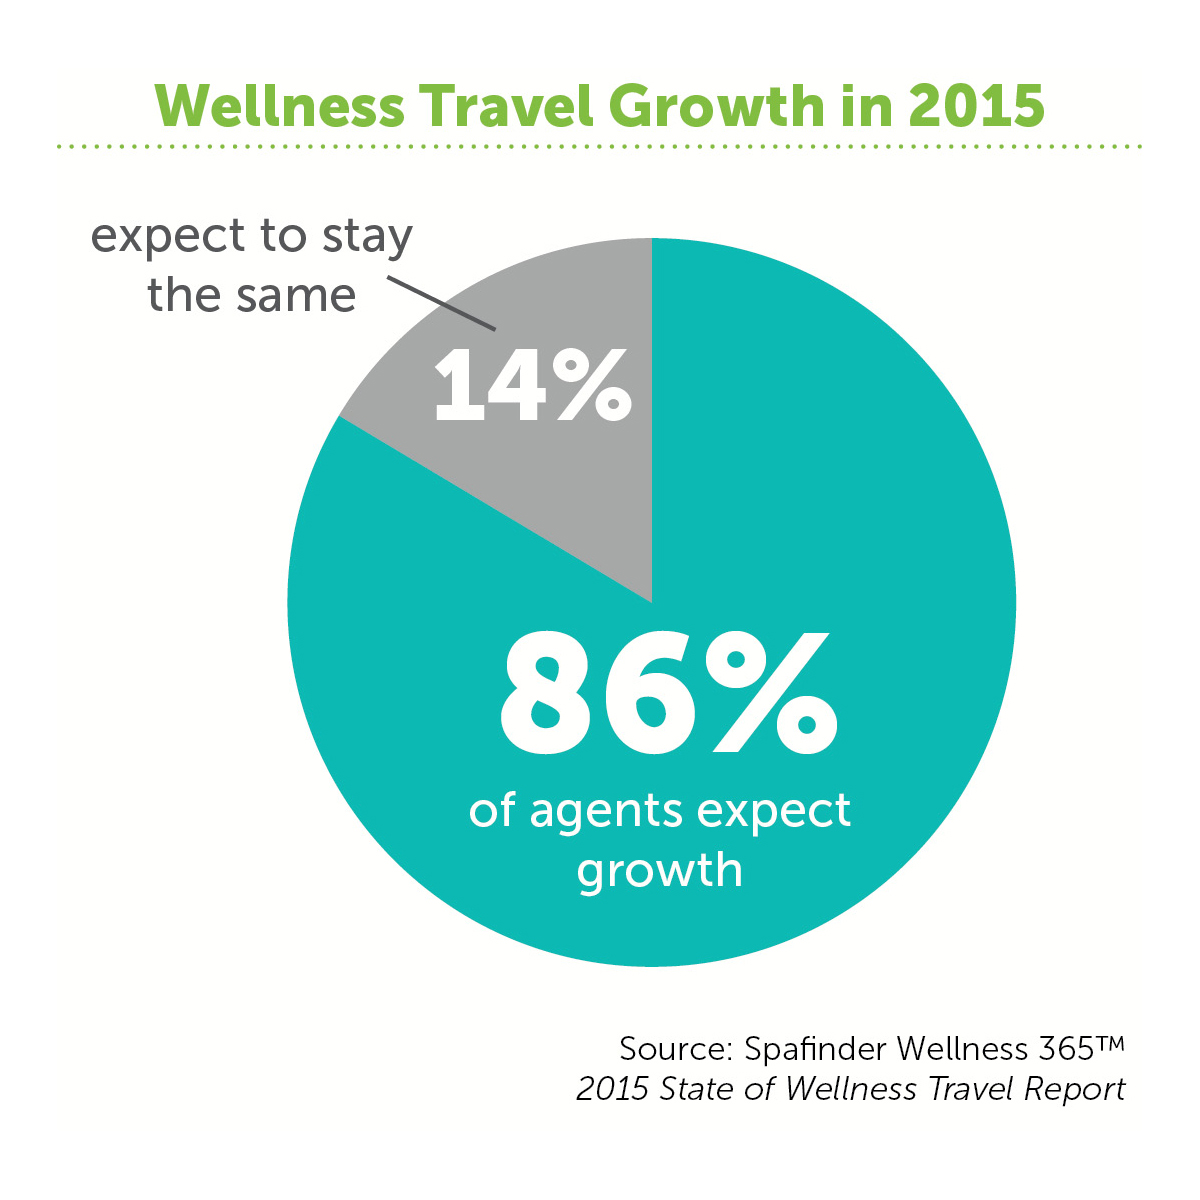 Wellness Travel Growth in 2015